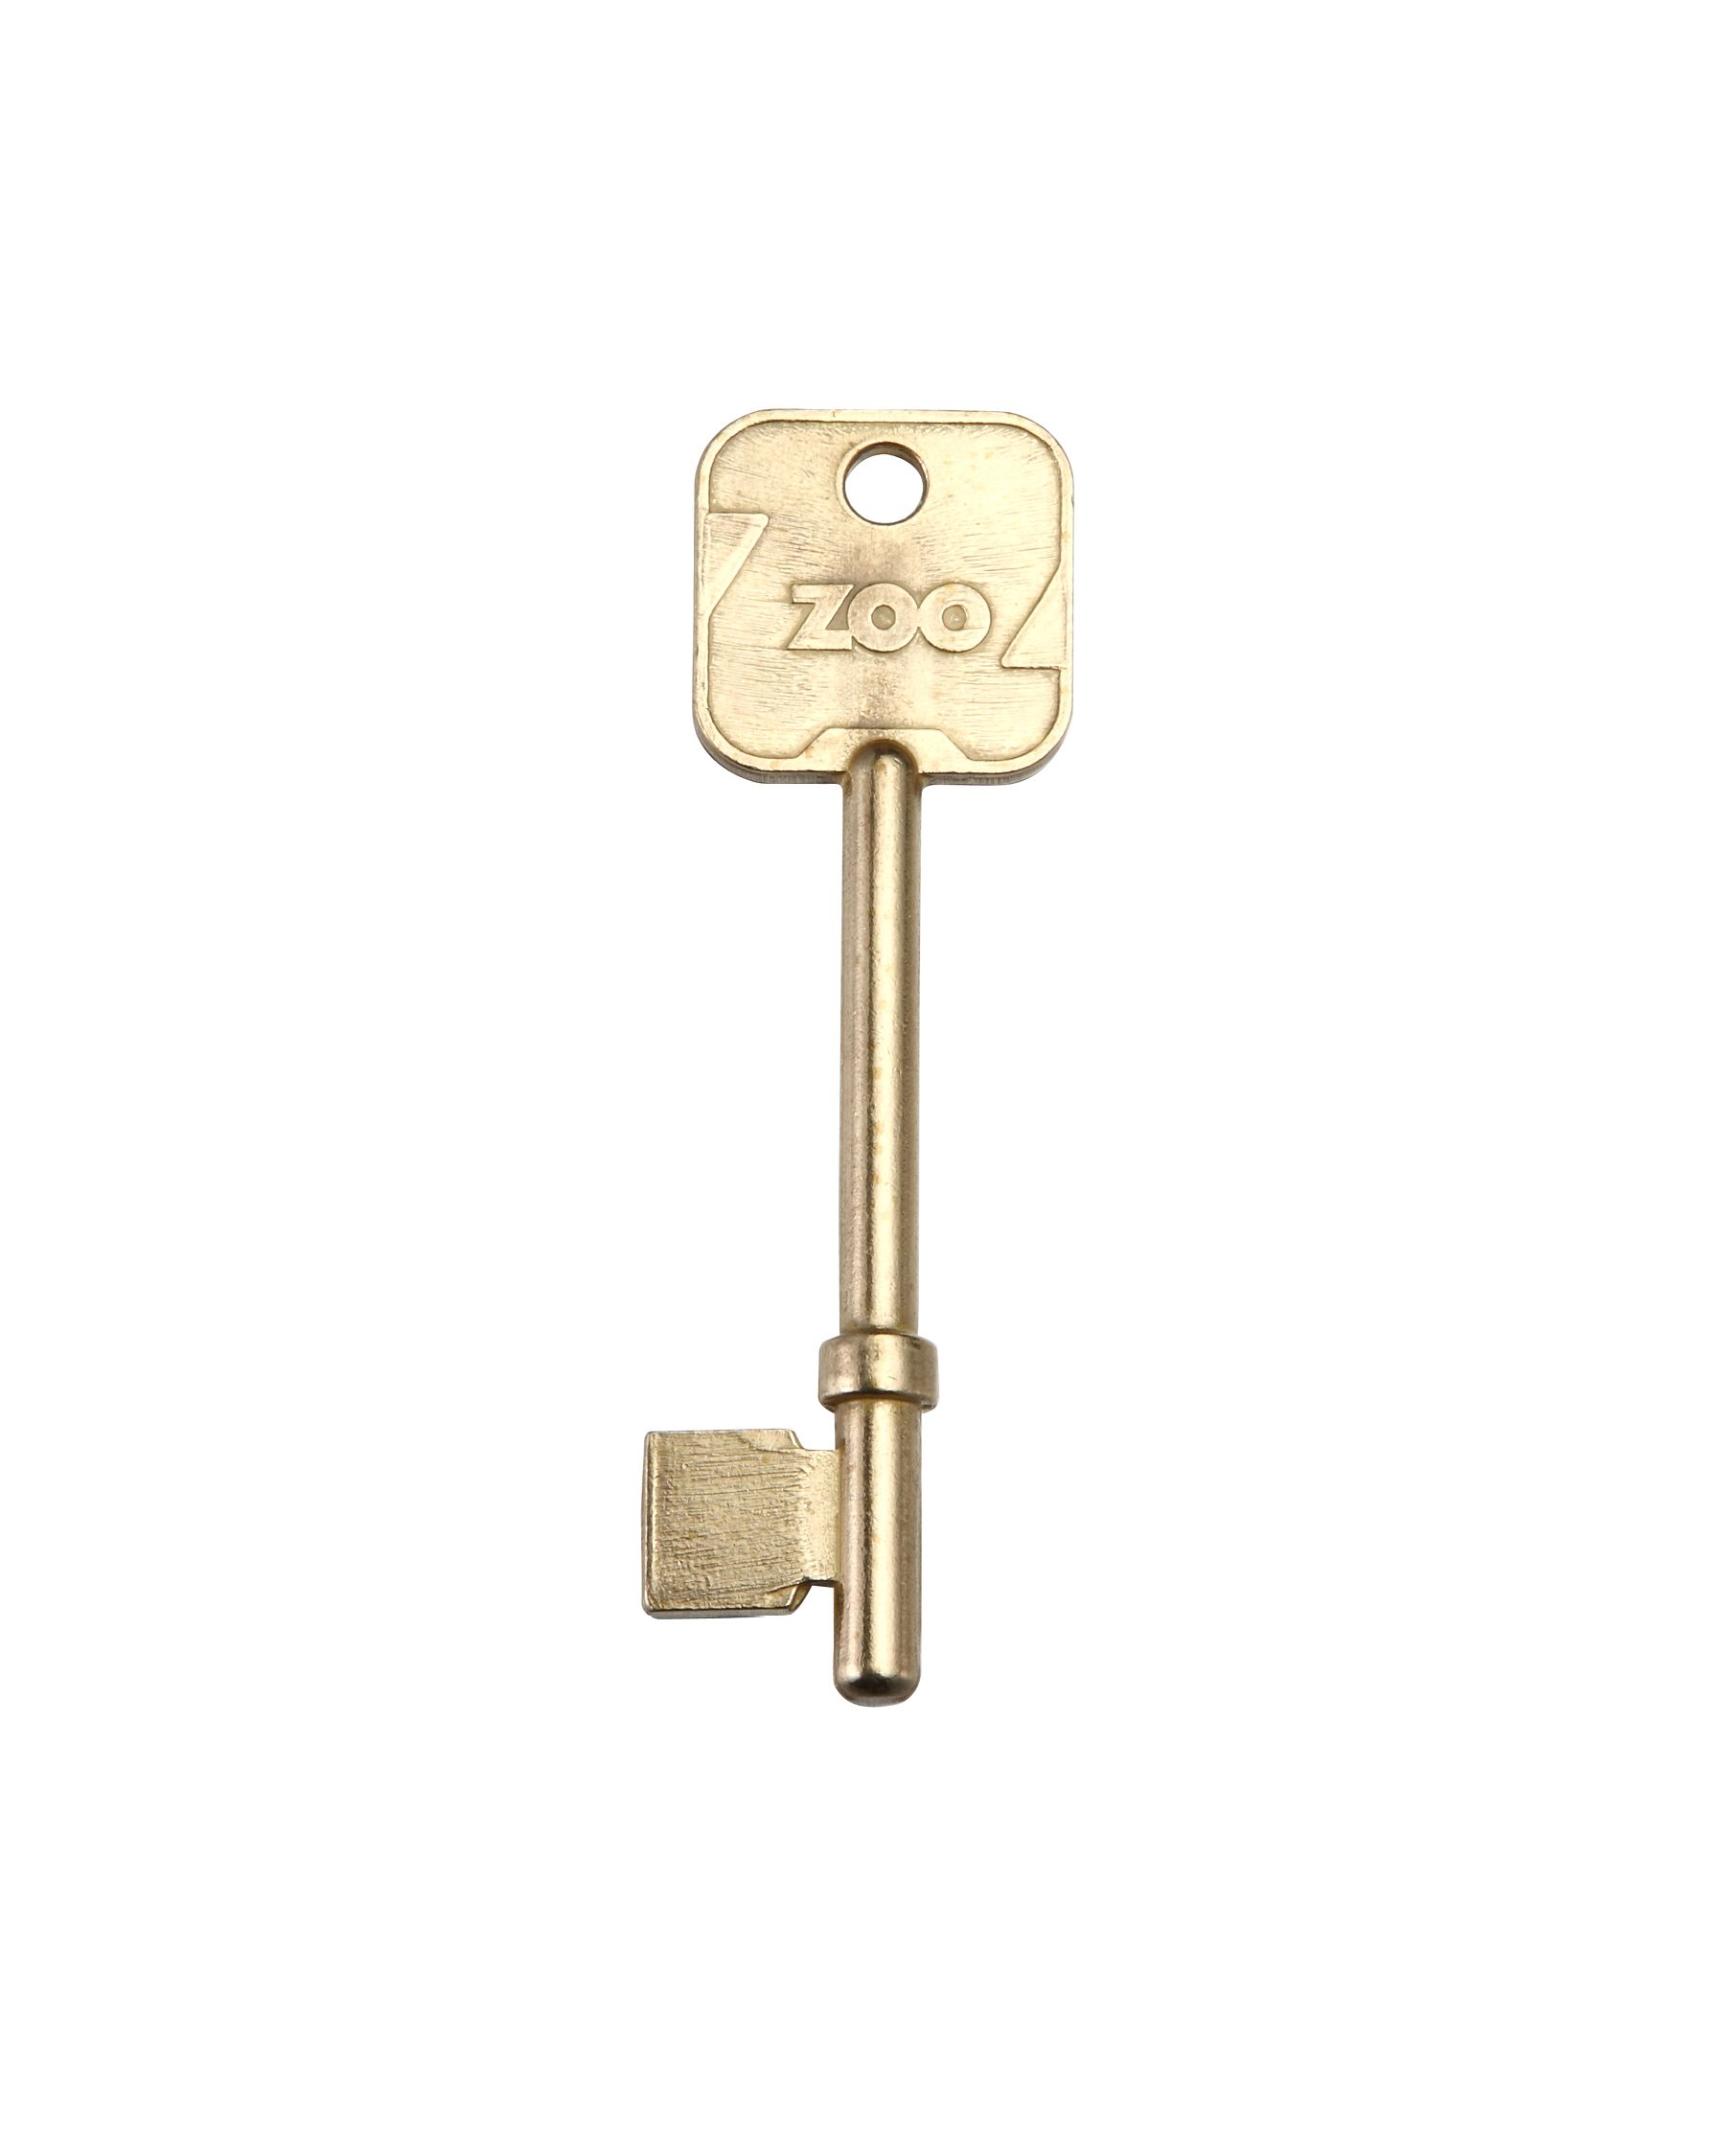 British Standard Spare Blank Keys to suit 64mm and 76mm Locks